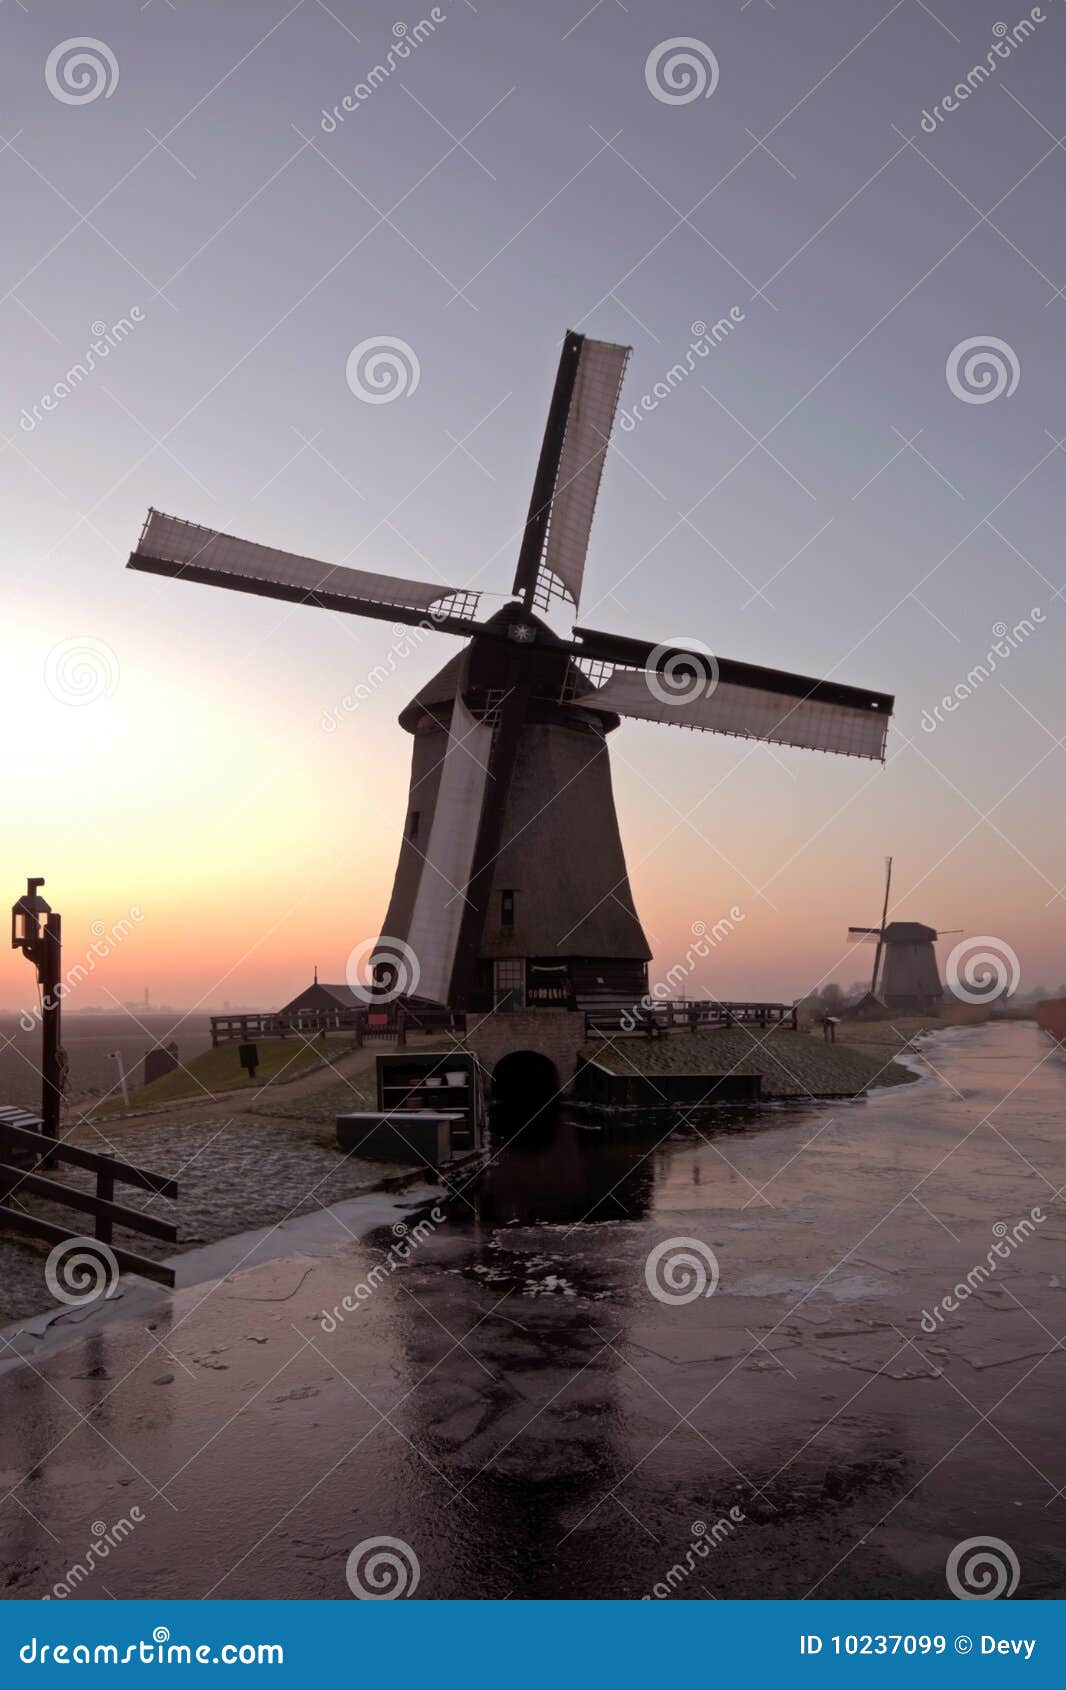 Ancient Traditional Windmills in the Netherlands Stock Image - Image of ...